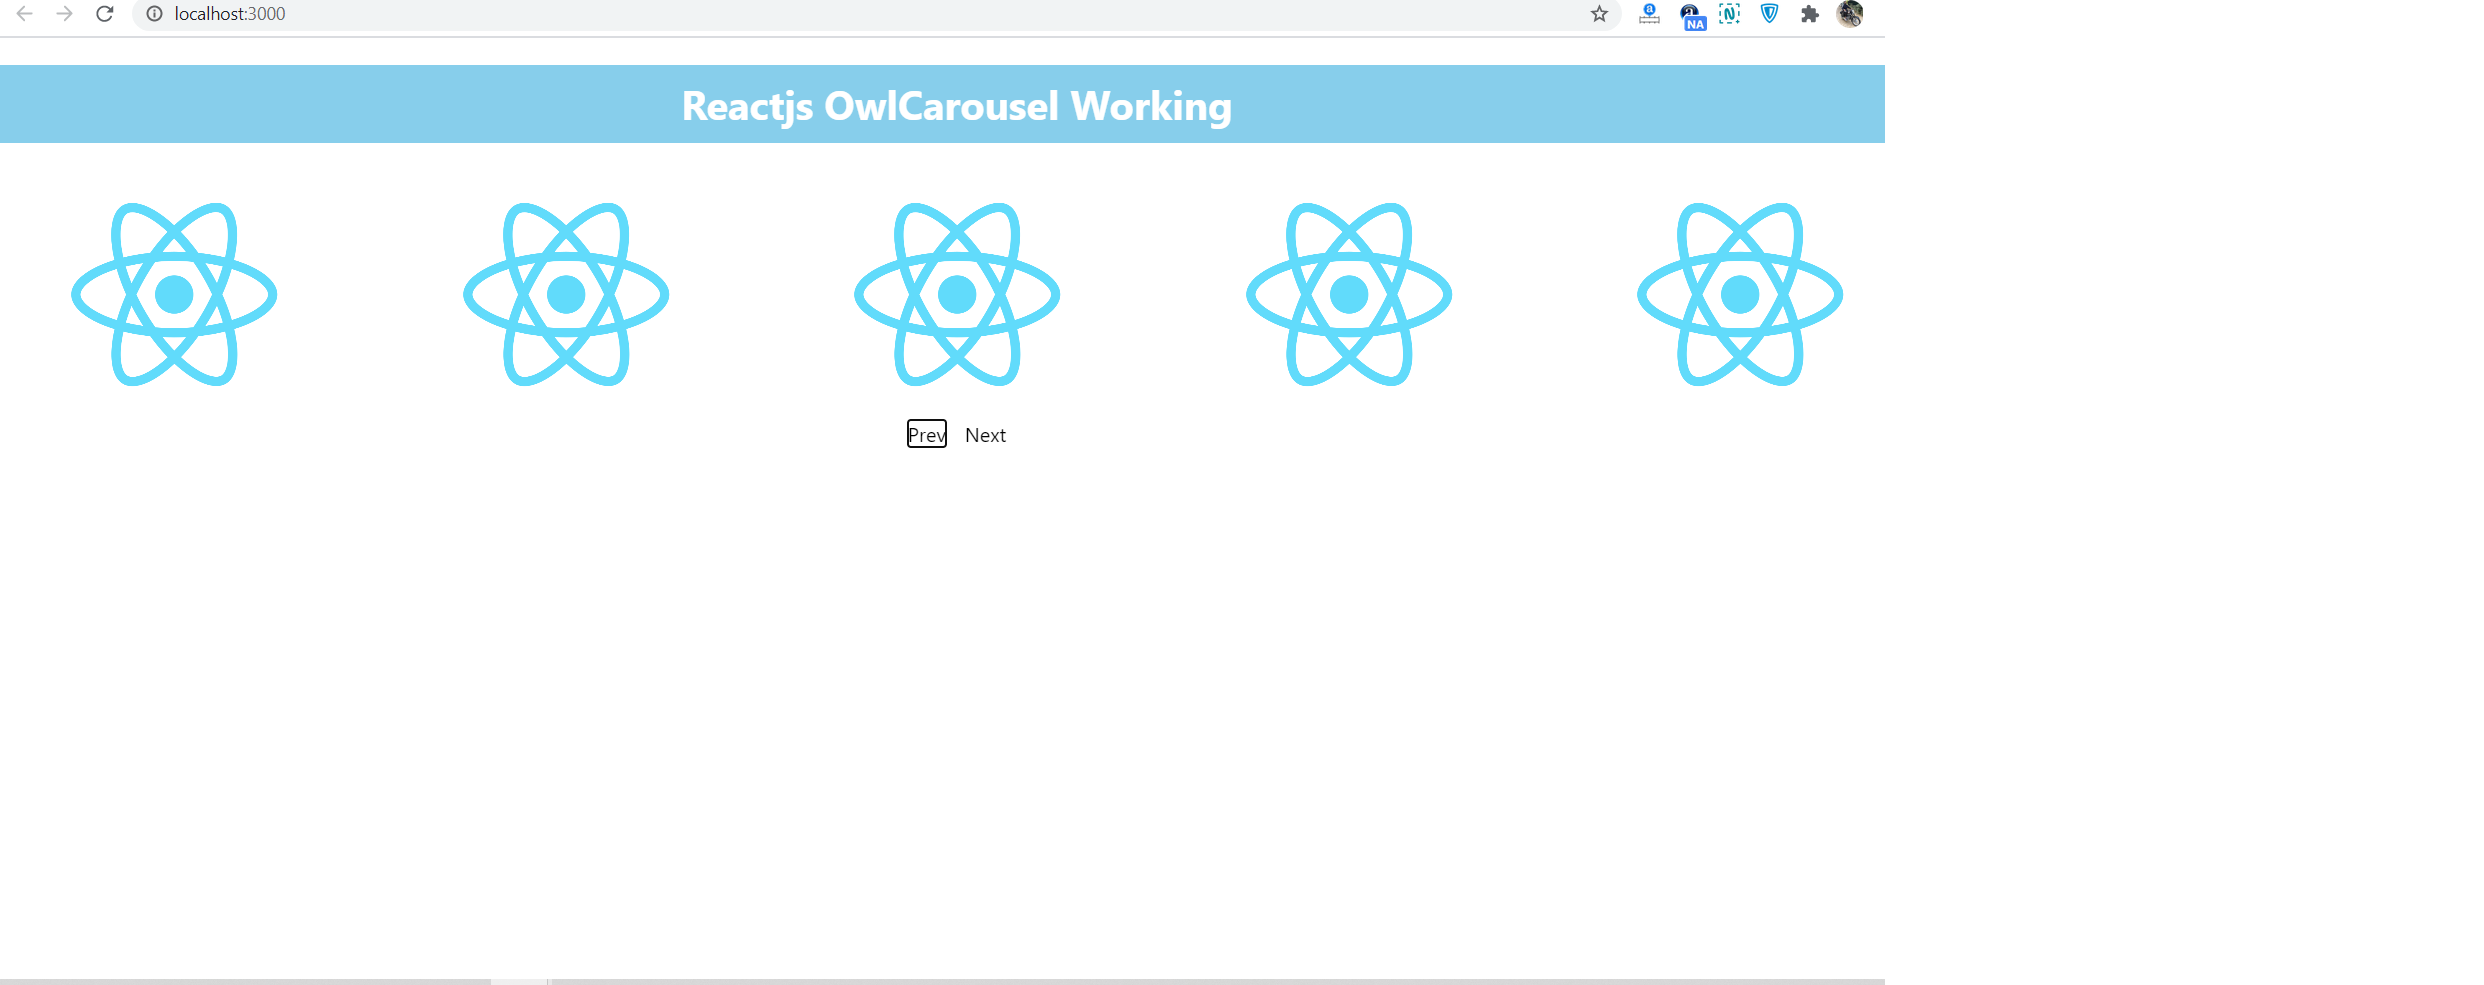 Reactjs Owl Carousel Working Tutorial - Therichpost